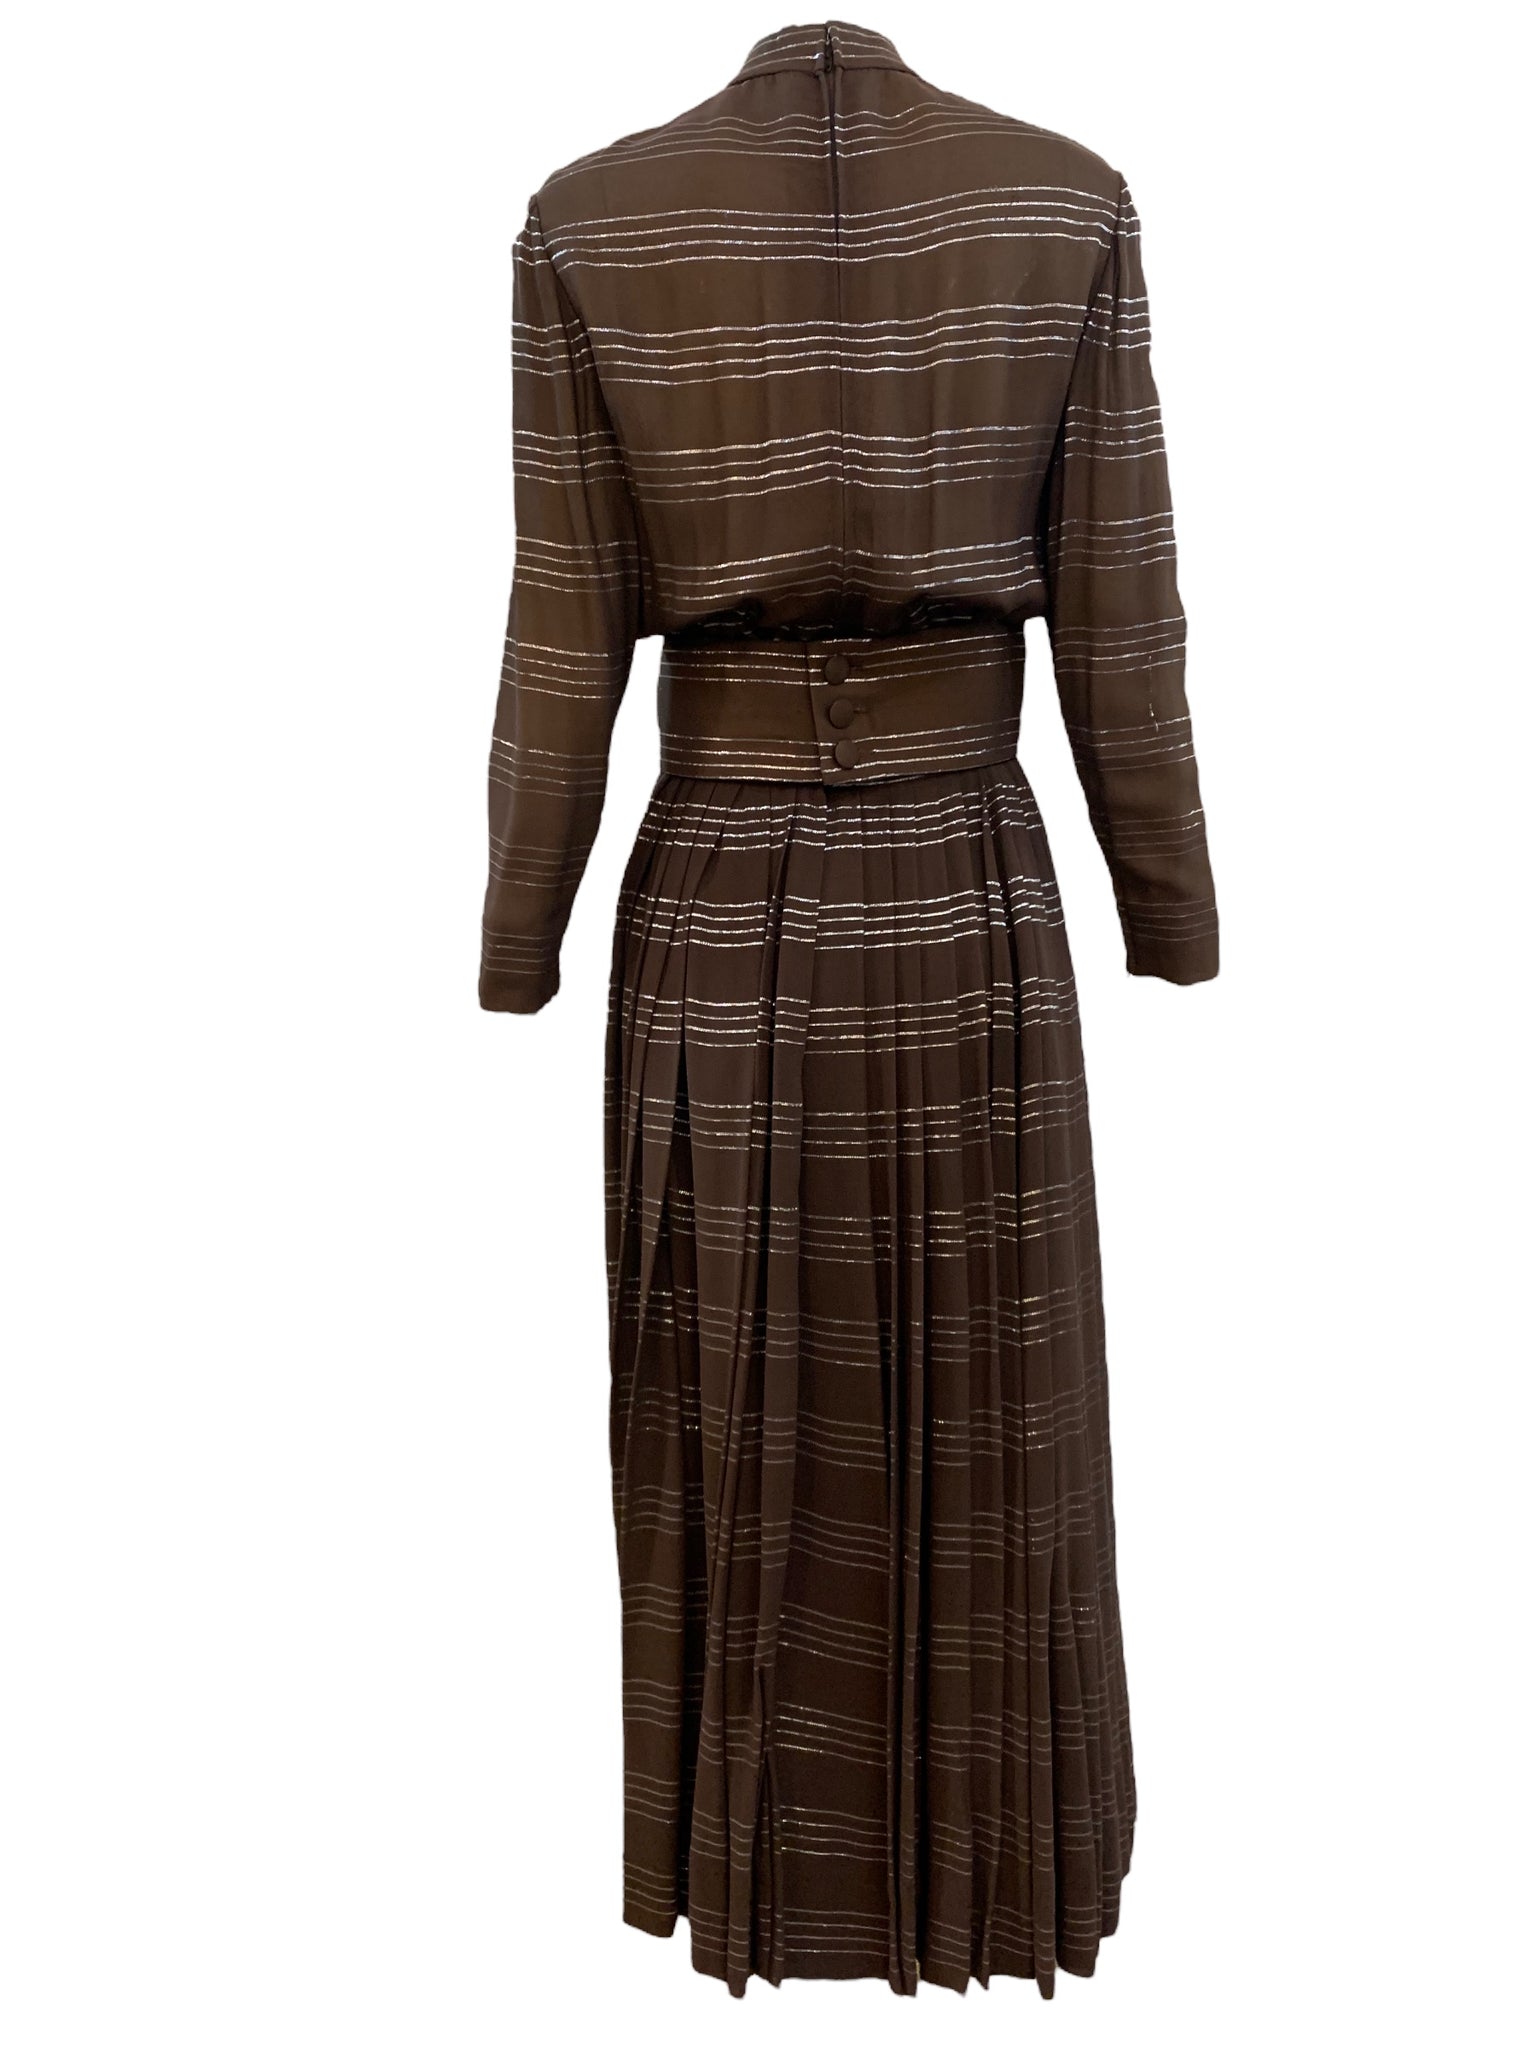 Norell Tassell 70 Chocolate Brown Silk Striped Dress BACK 3 of 5